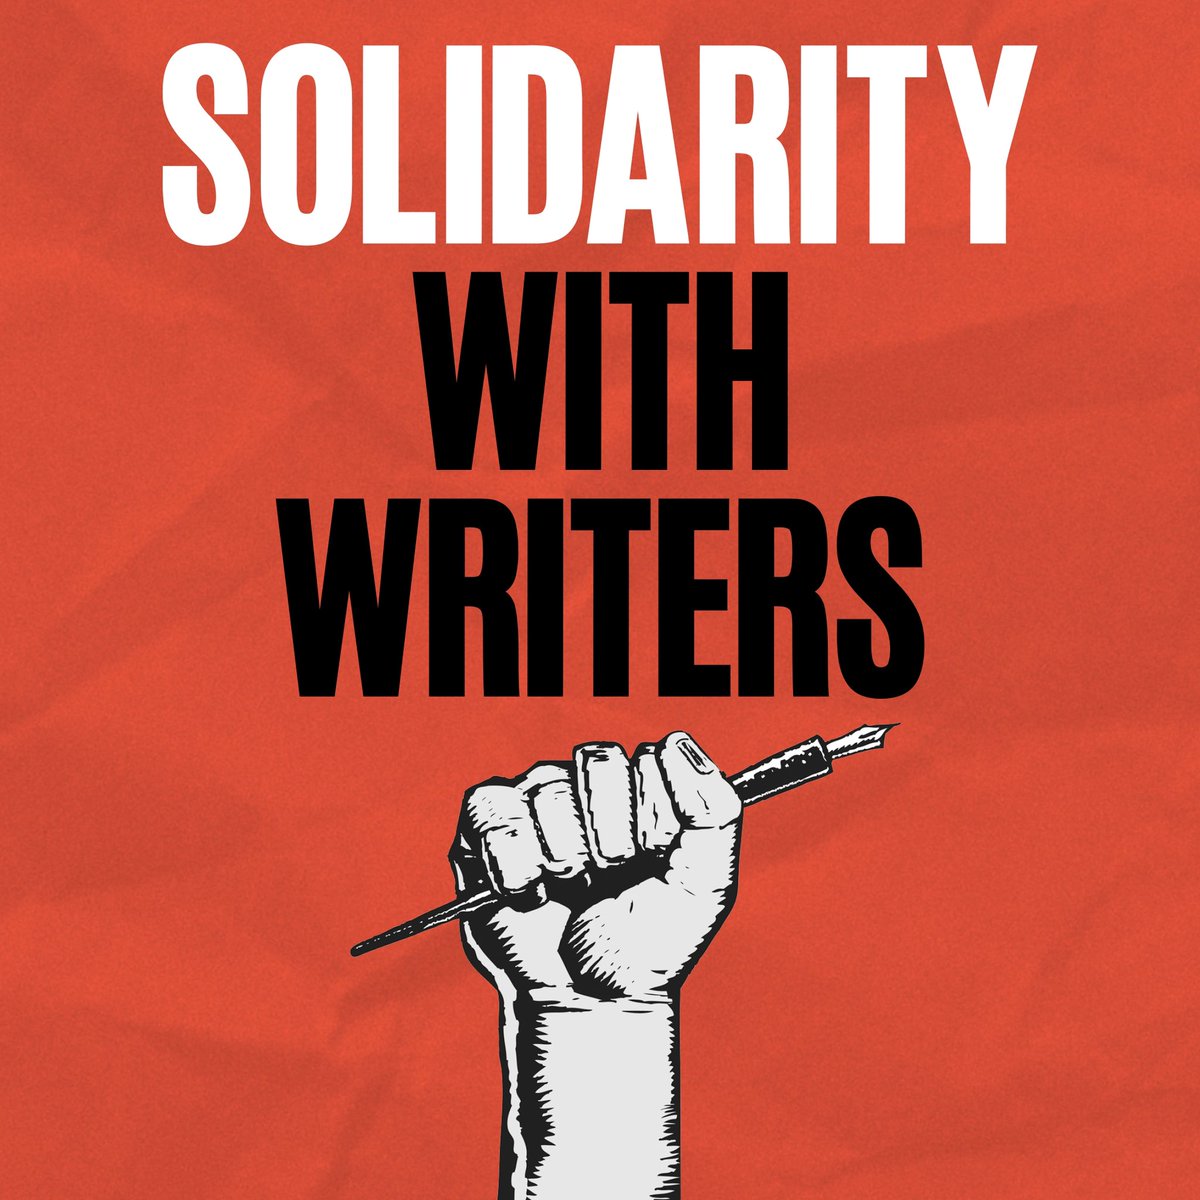 Today is a global day of solidarity for Screenwriters Everywhere. I support the members of the WGA who have been on strike since May 2nd. I hope they can reach a fair agreement that will benefit everyone.